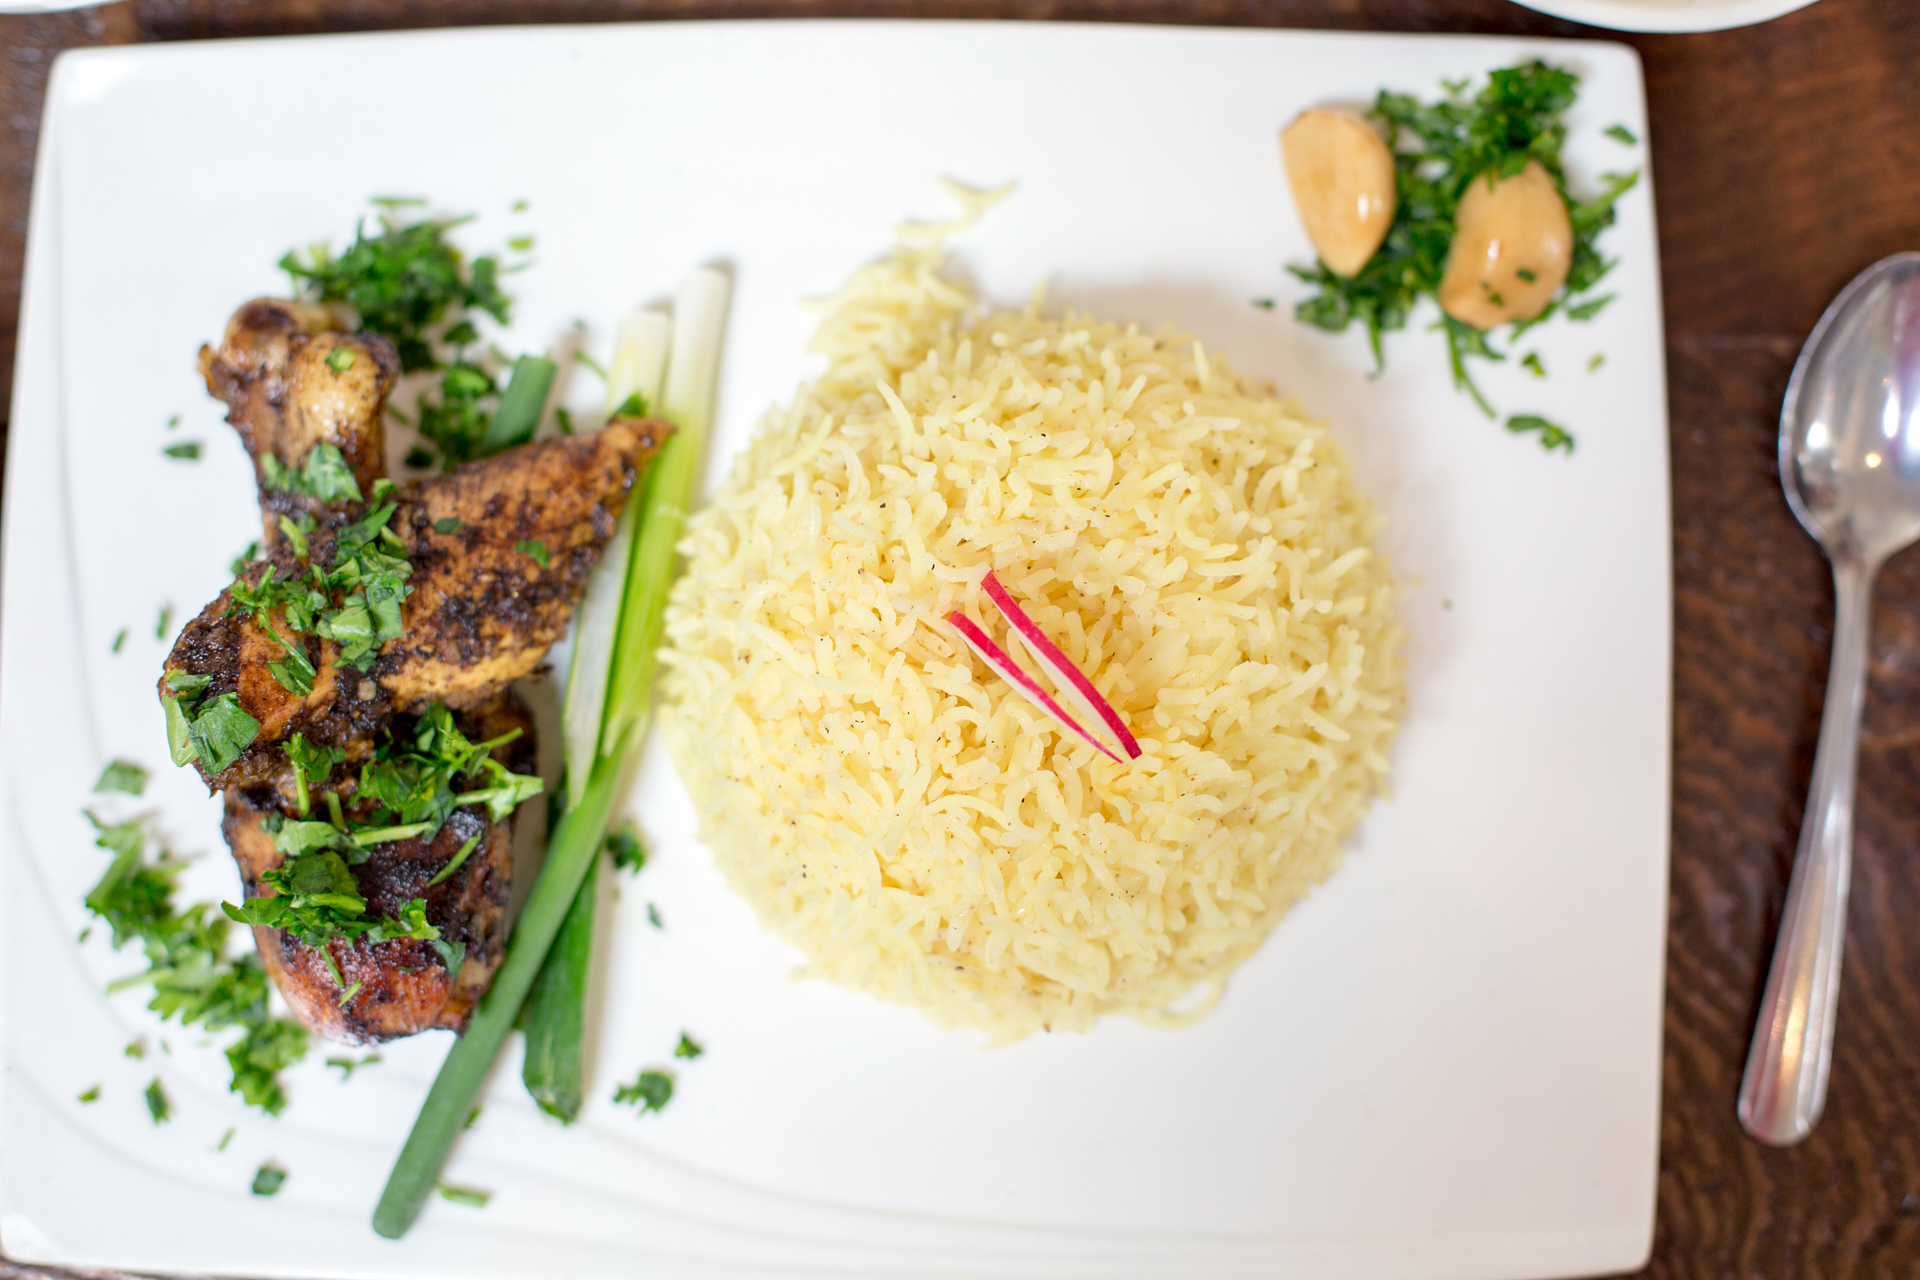 Komaaj serves turmeric rice with roasted chicken marinated in sour orange molasses, mountain cumin and Persian hogweed.